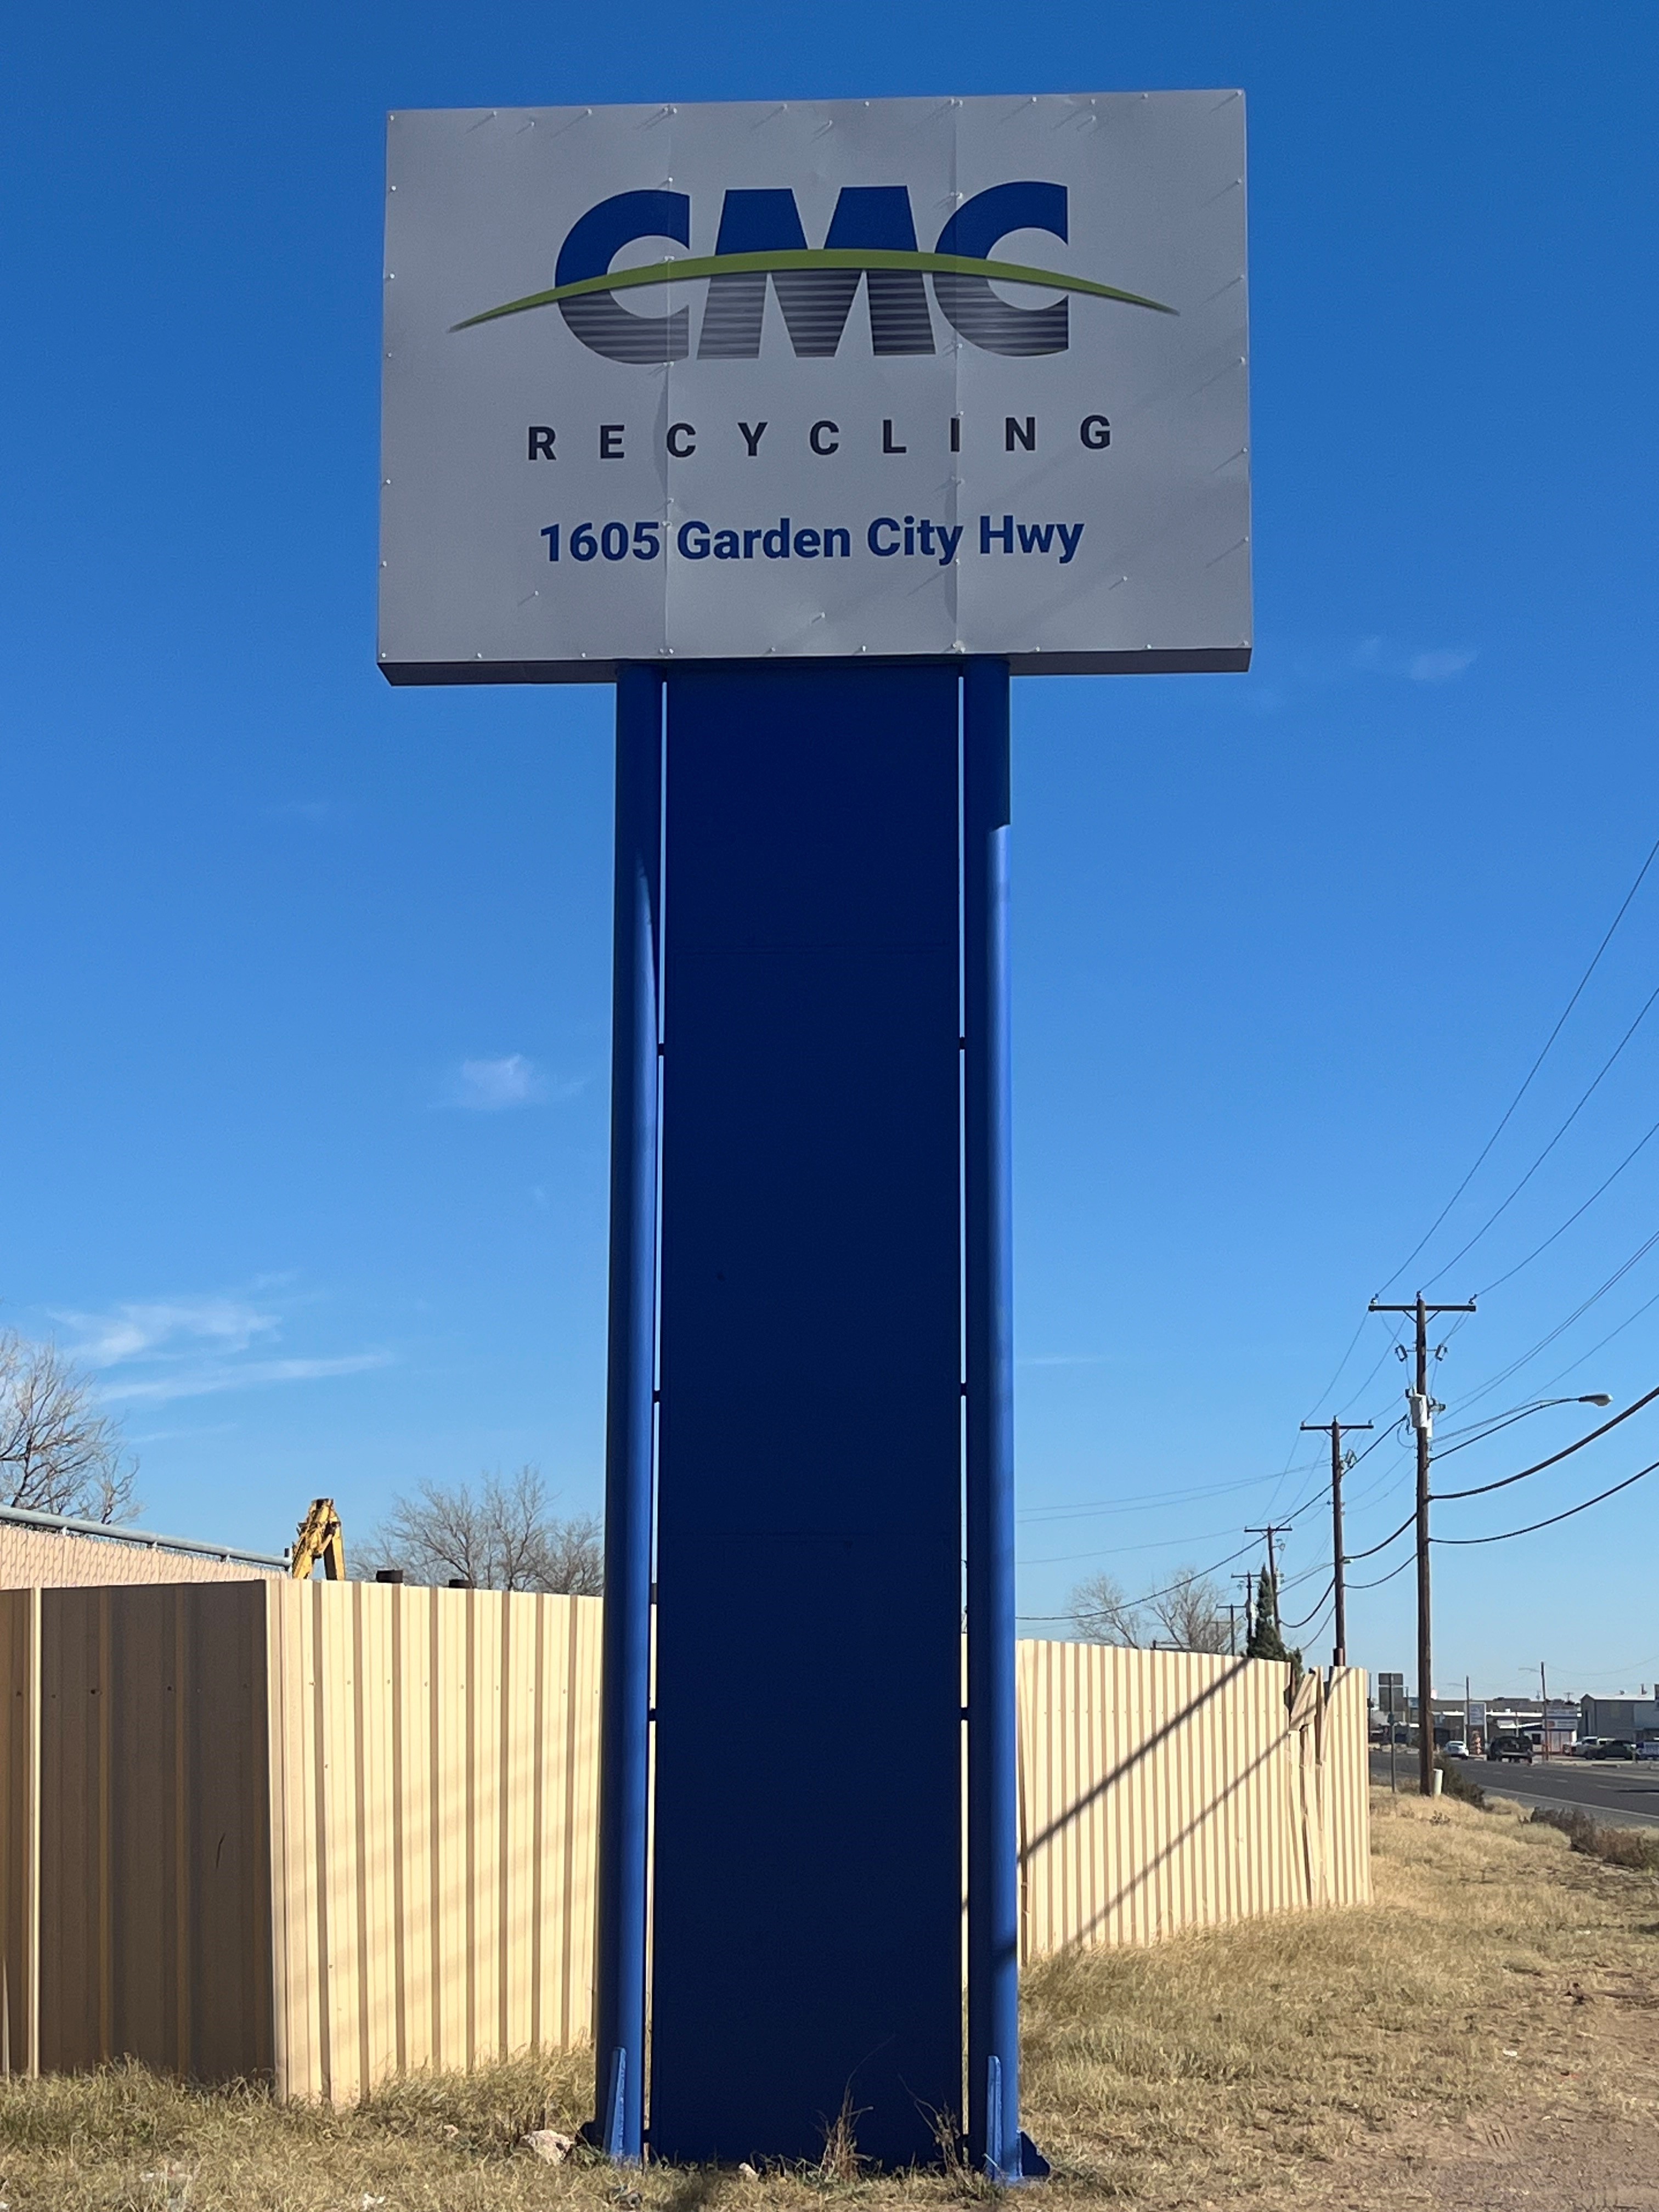 Photo from the street showing CMC Recycling Midland's main sign featuring CMC logo